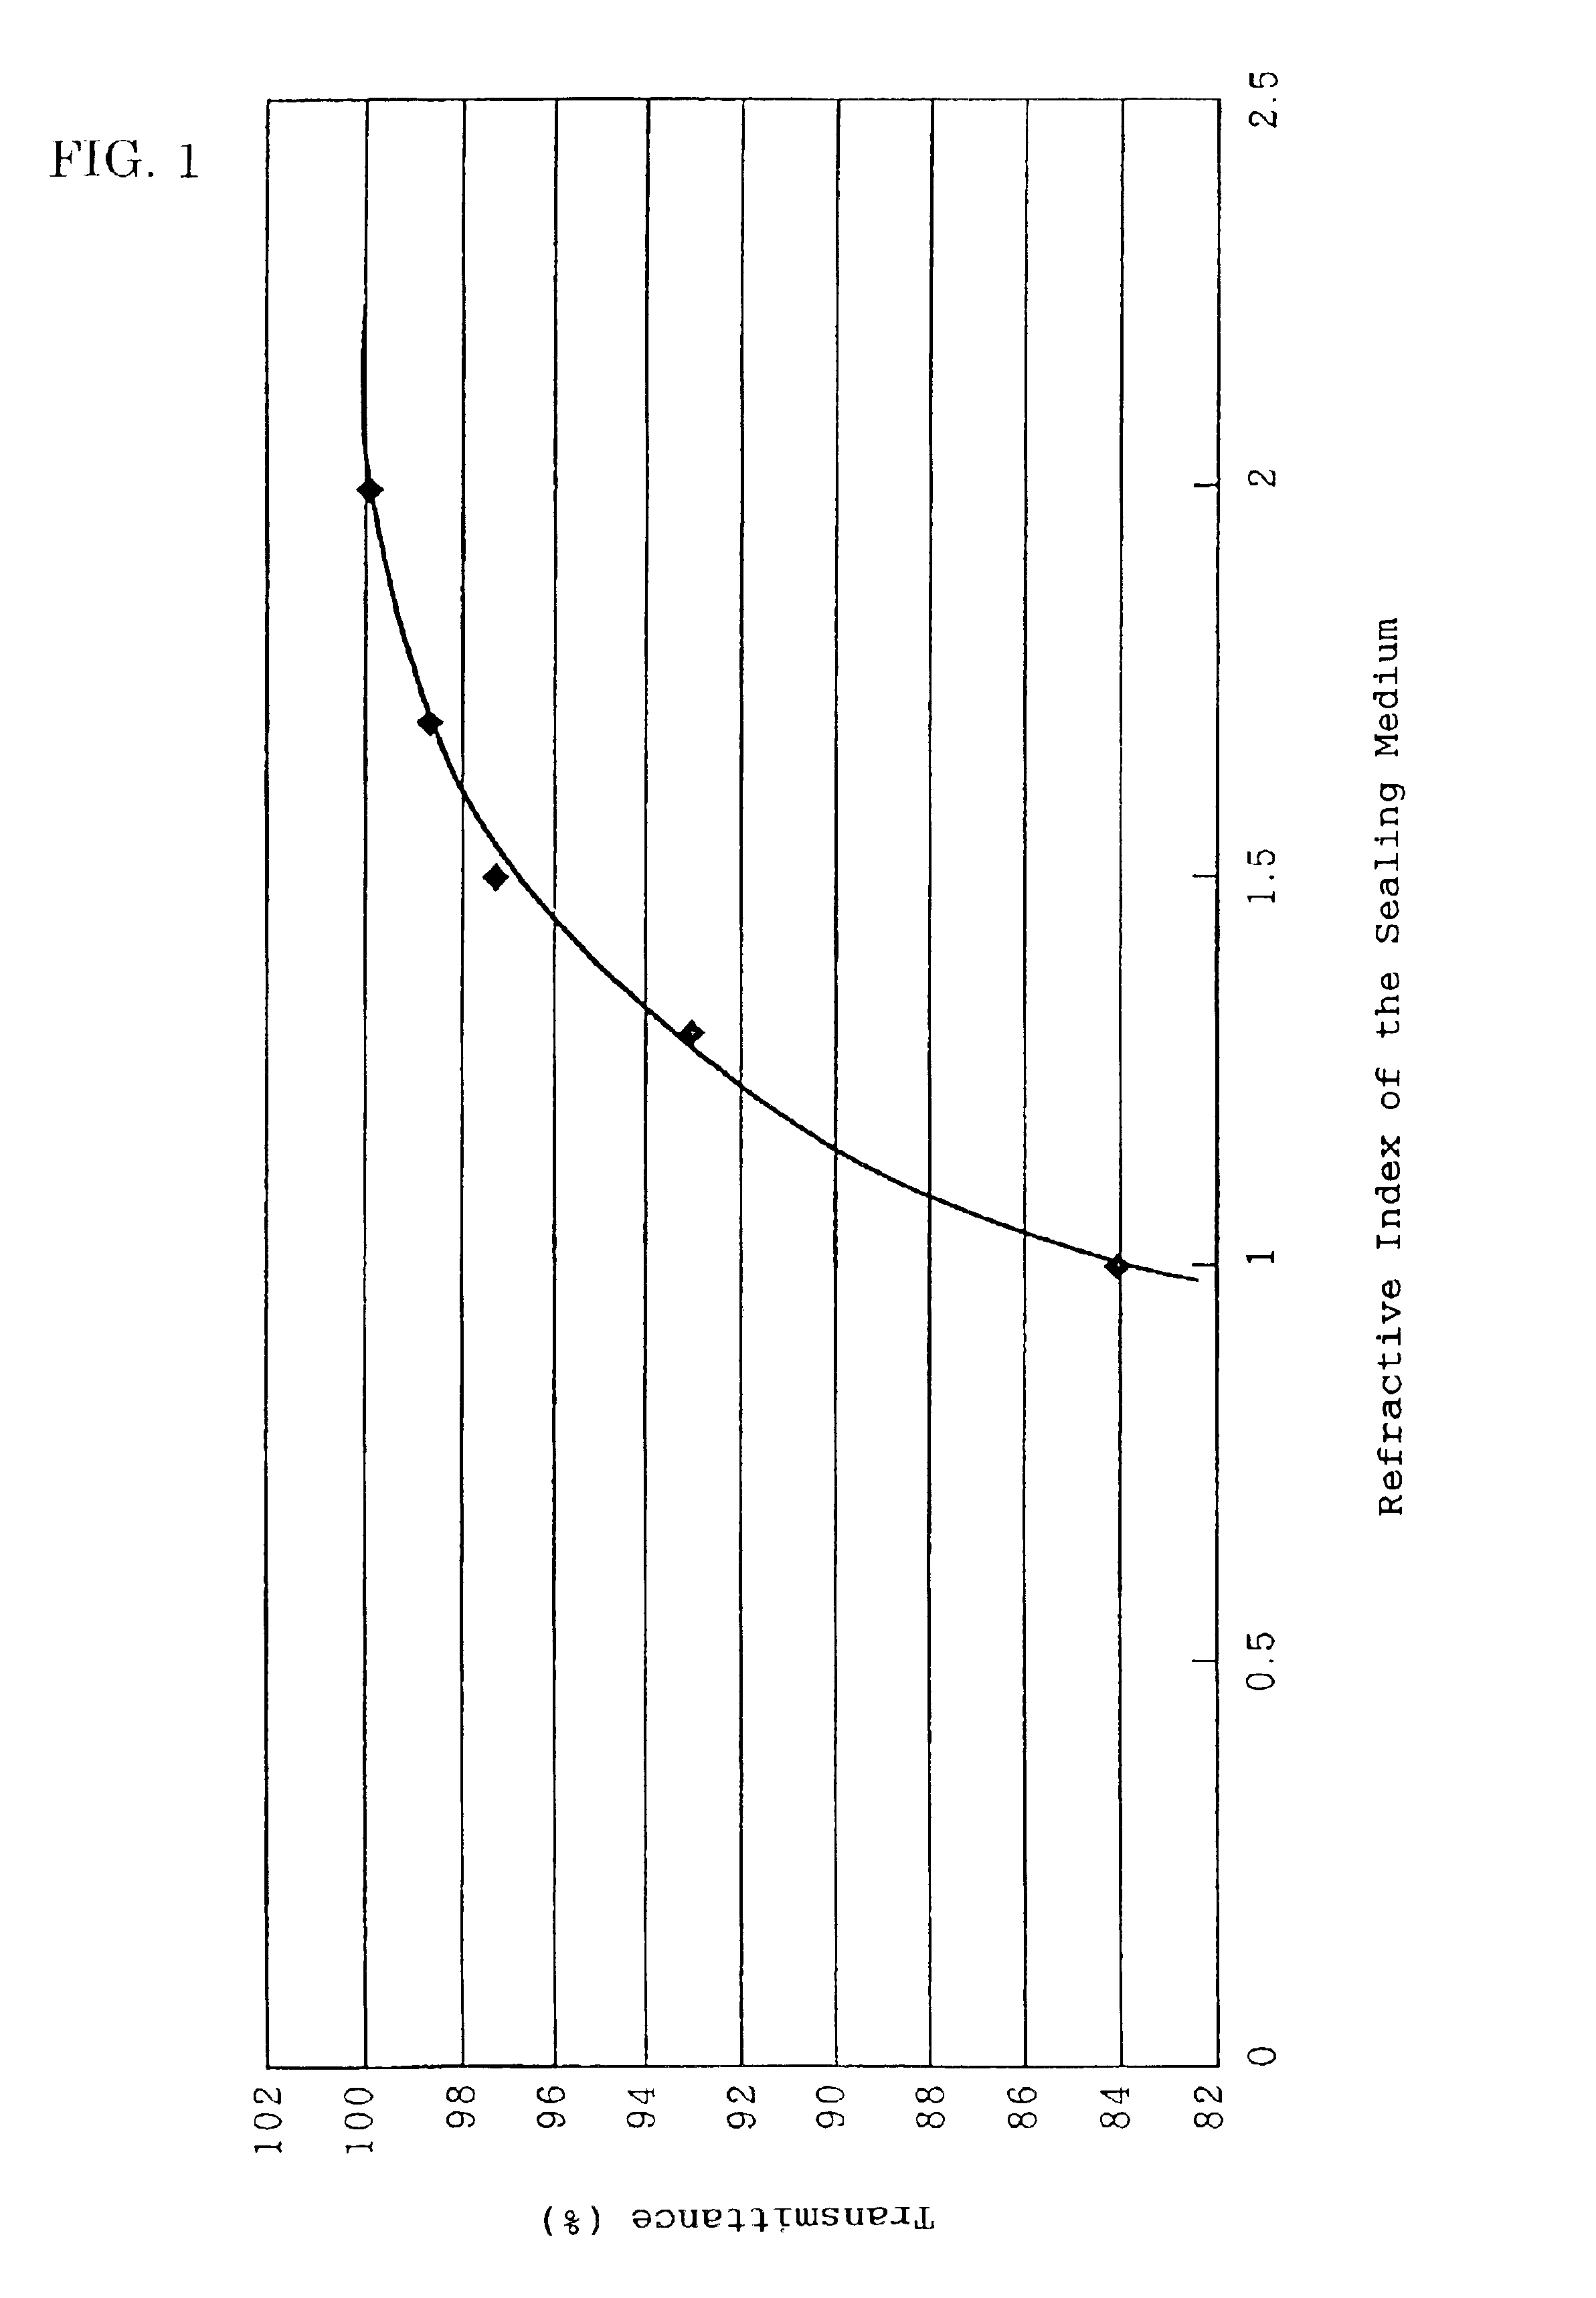 Organic EL display device having certain relationships among constituent element refractive indices